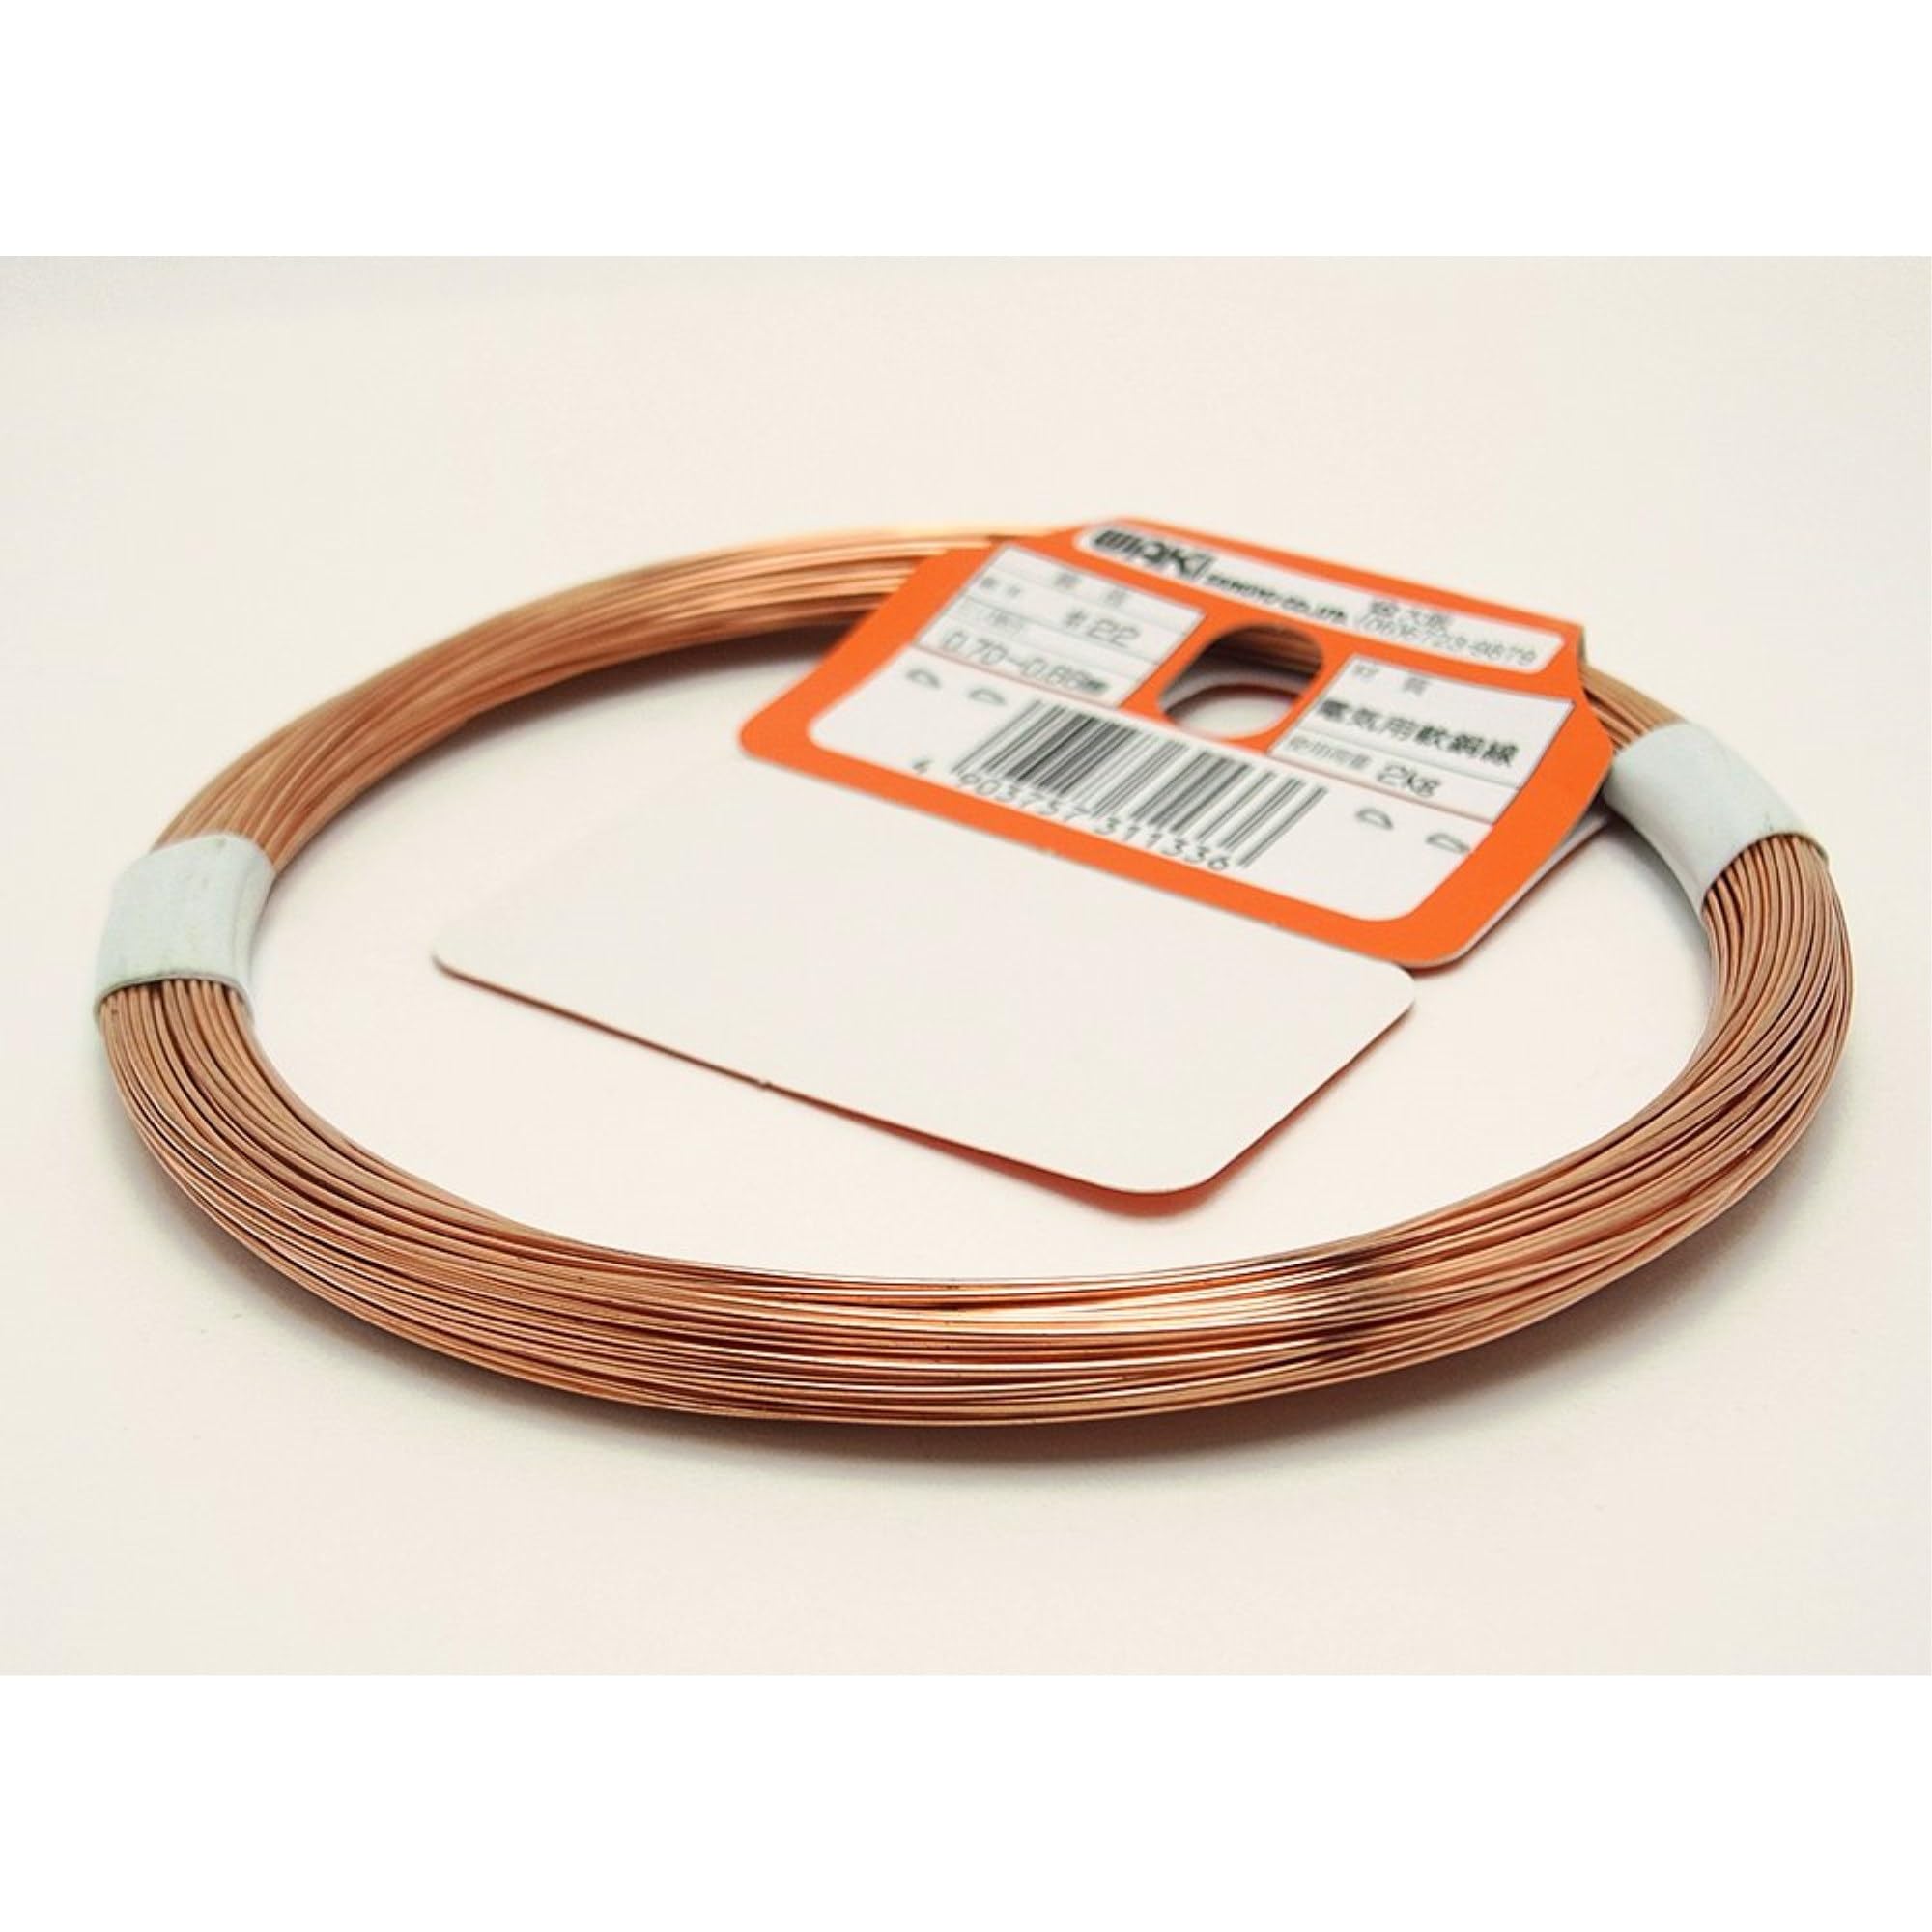  peace . industry copper line red brown #22X approximately 25m construction hobby HW-133